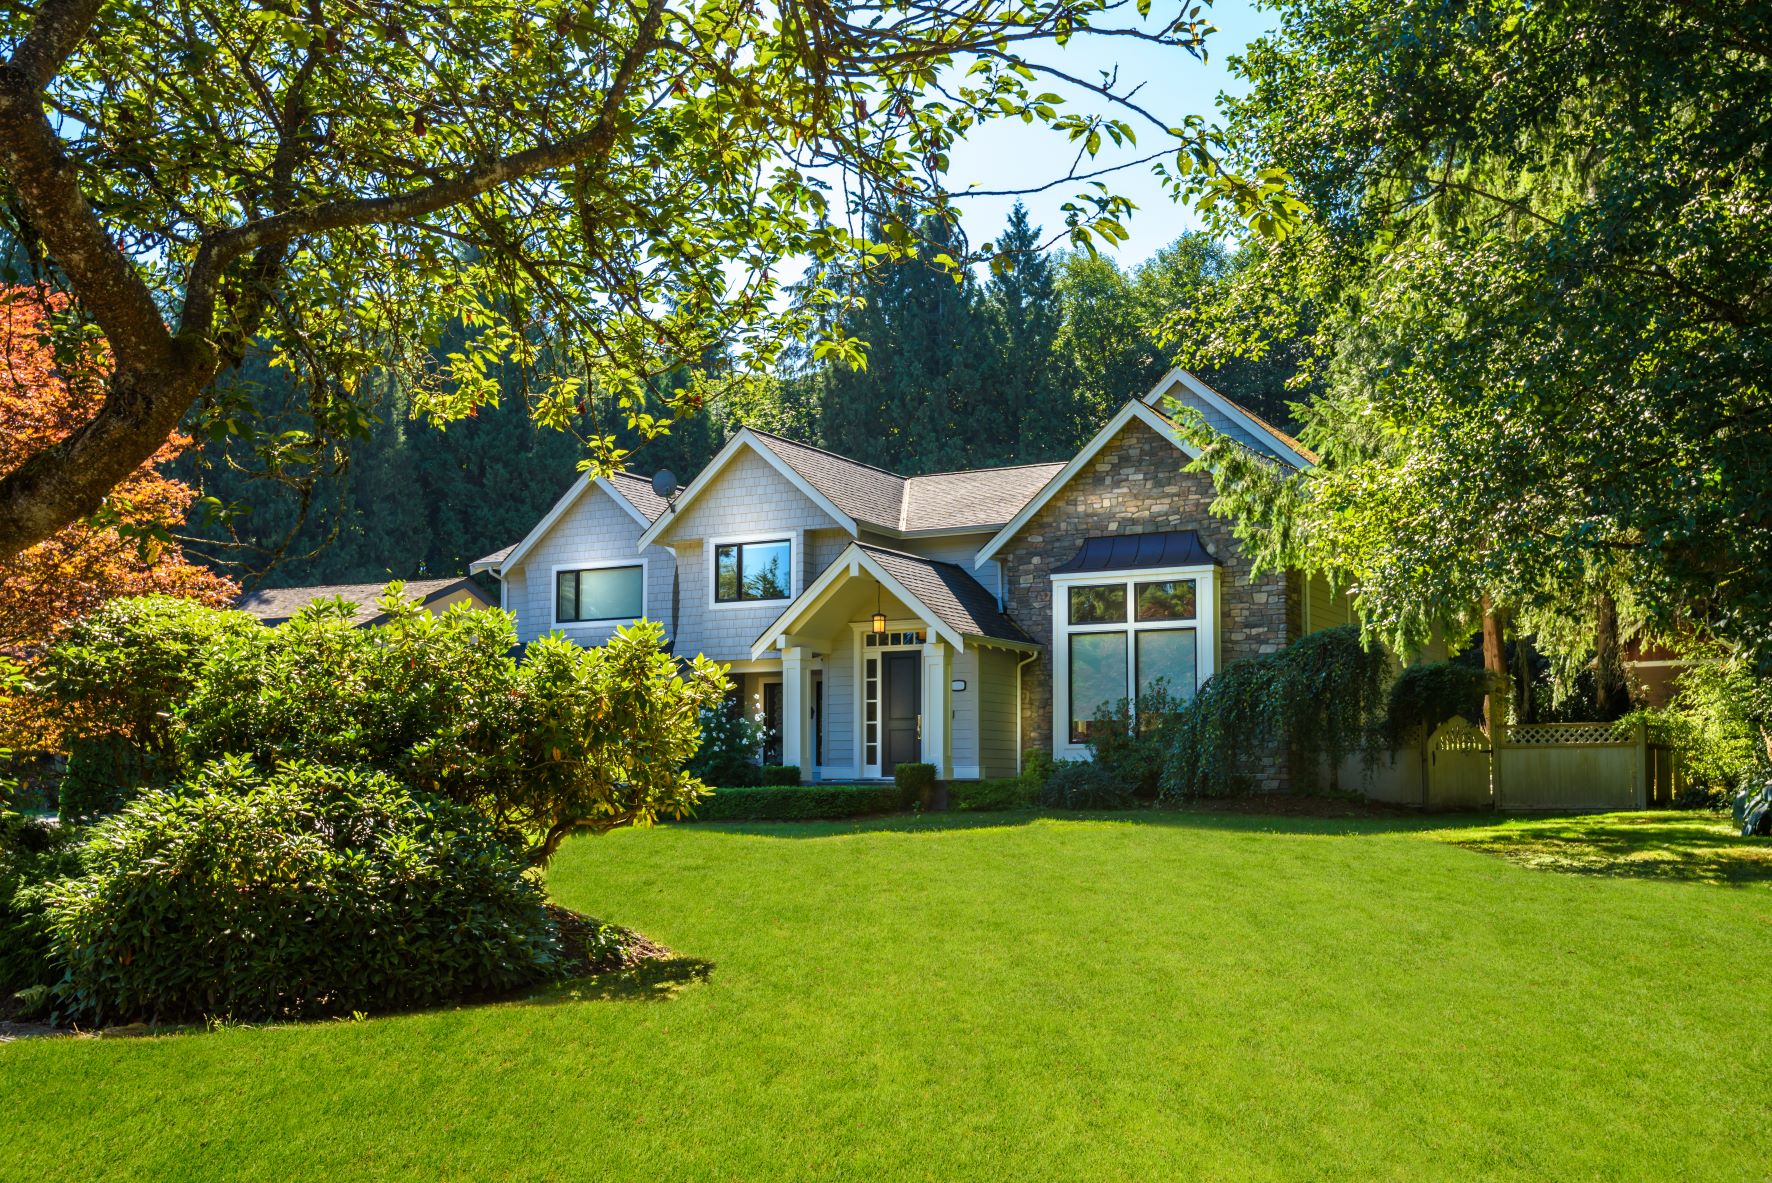 5 Details To Look For When Buying a House with Land